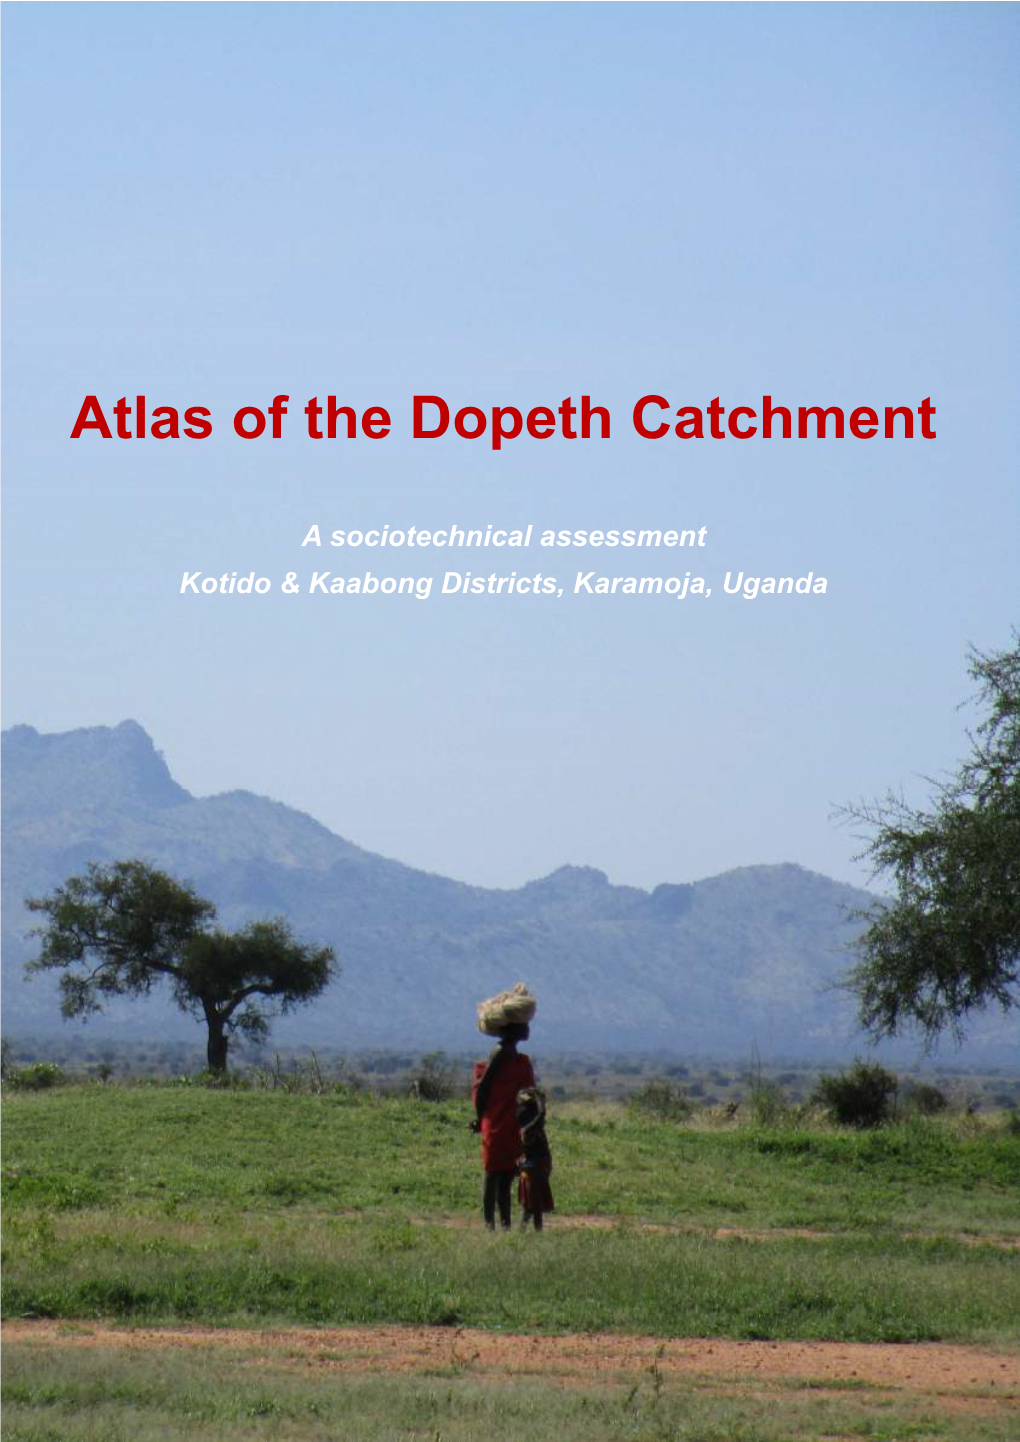 Atlas of the Dopeth Catchment